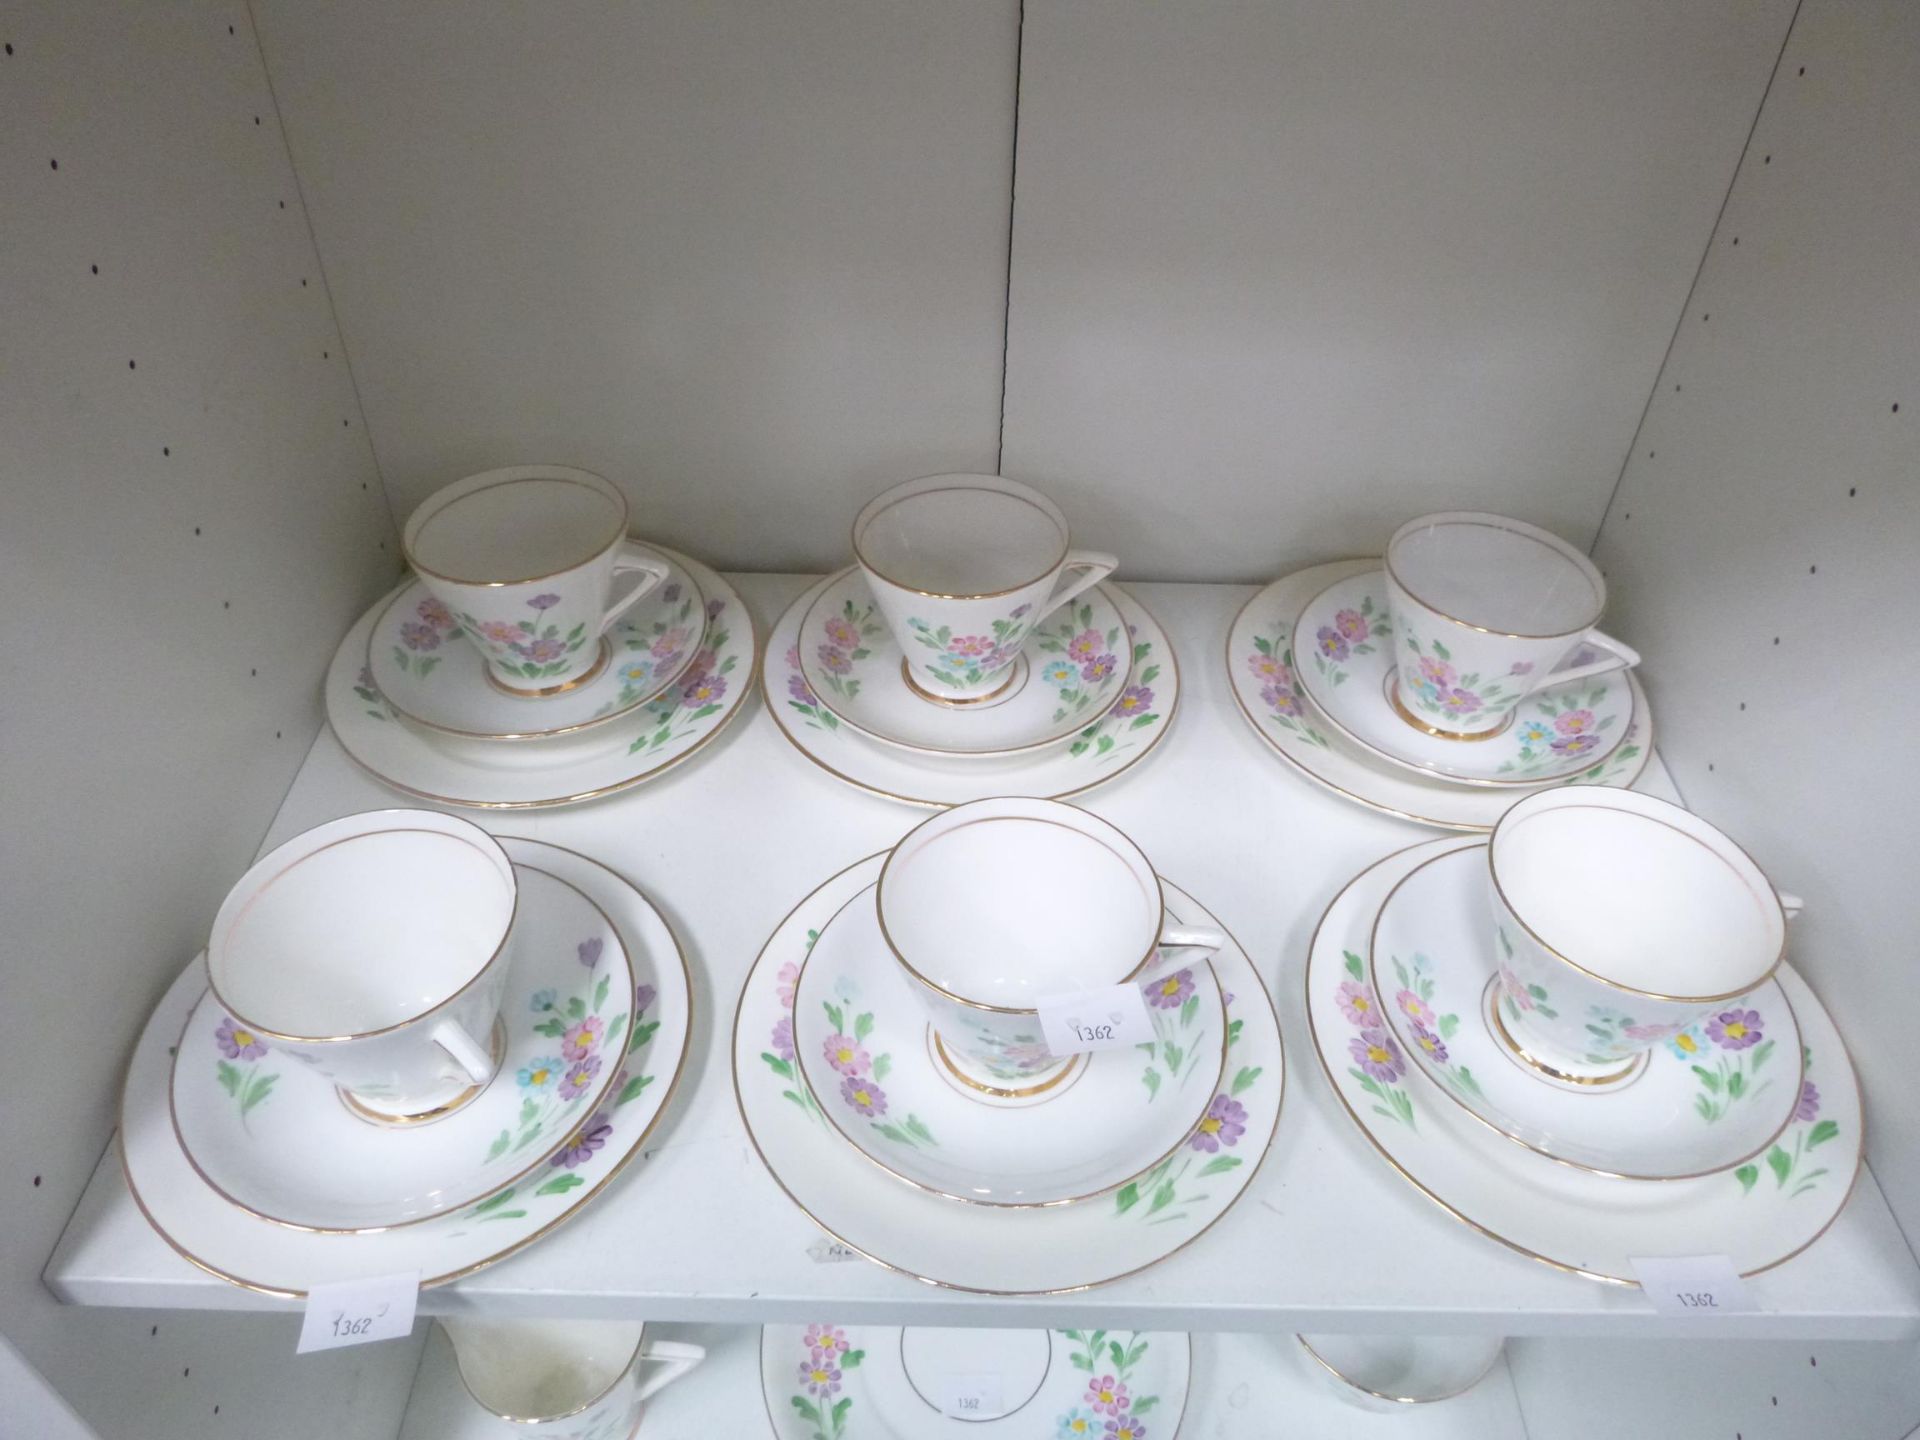 Two shelves to contain a Phoenix Bone China Tea Set with Tea Cups, Saucers etc (est £20-£40) - Image 2 of 3